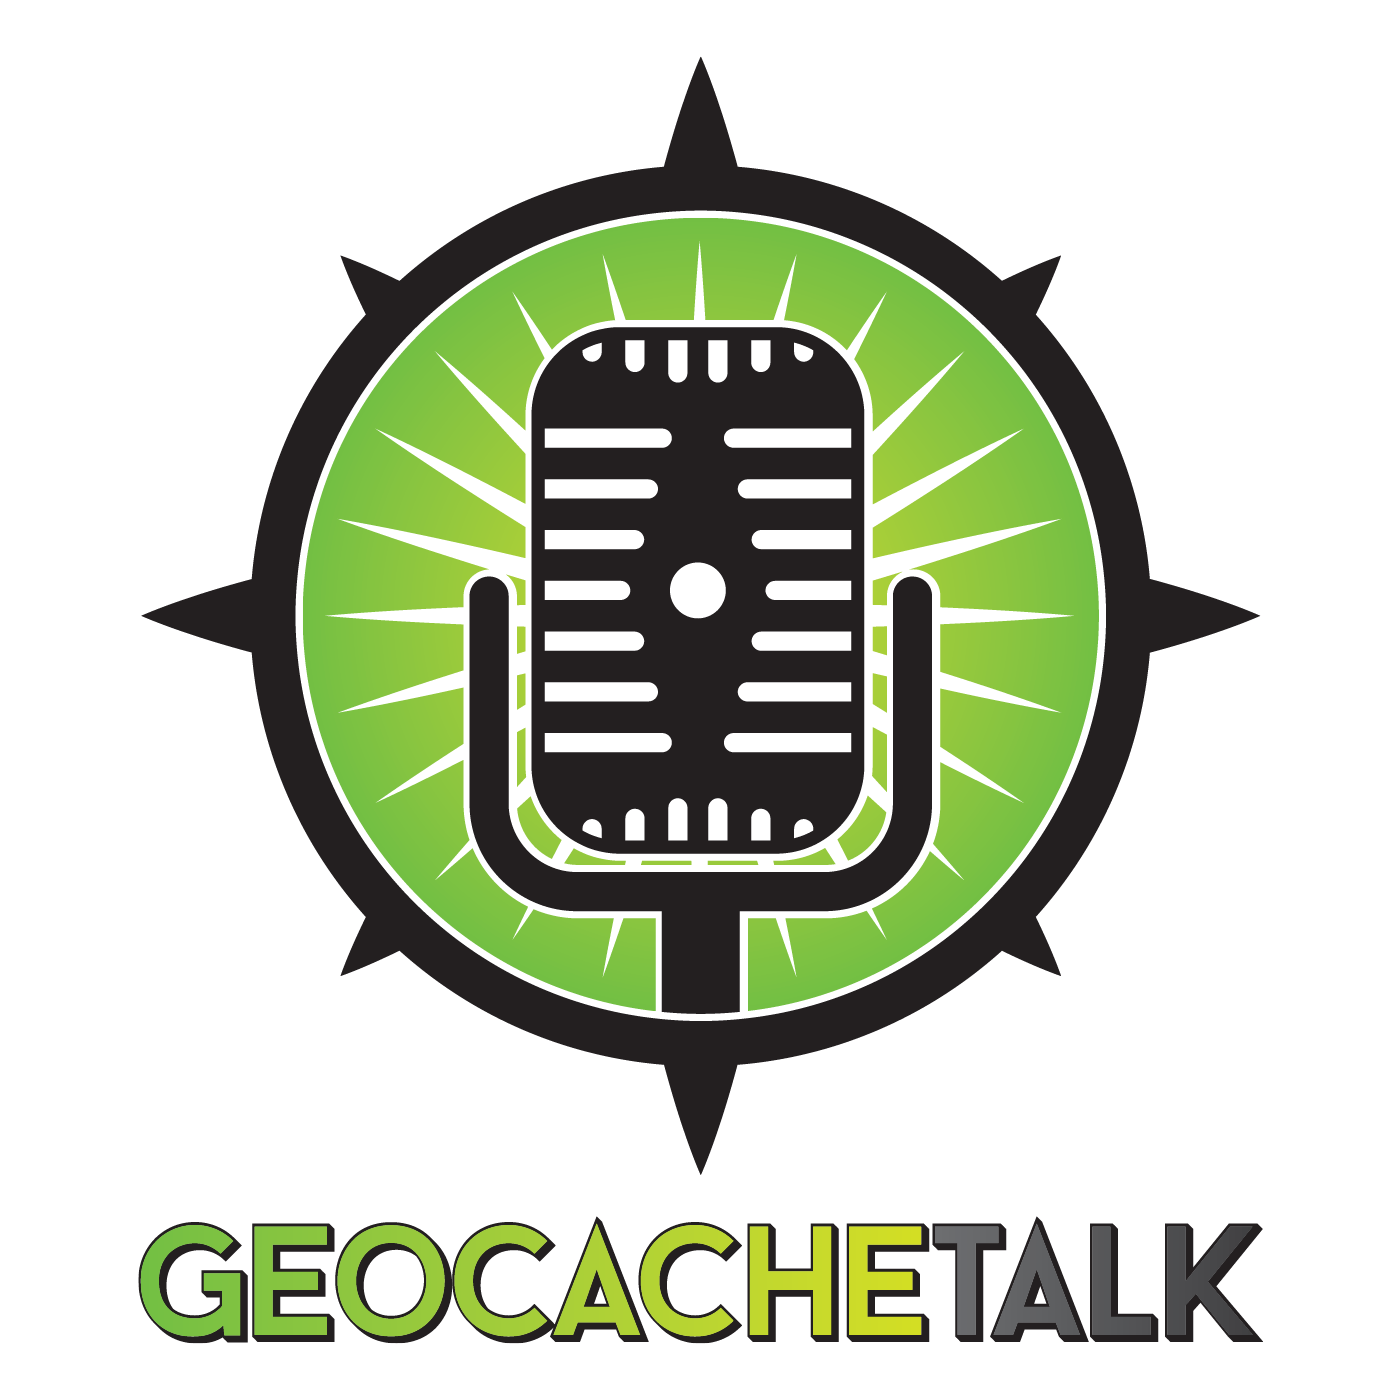 Show 15 – The Geocaching Vlogger